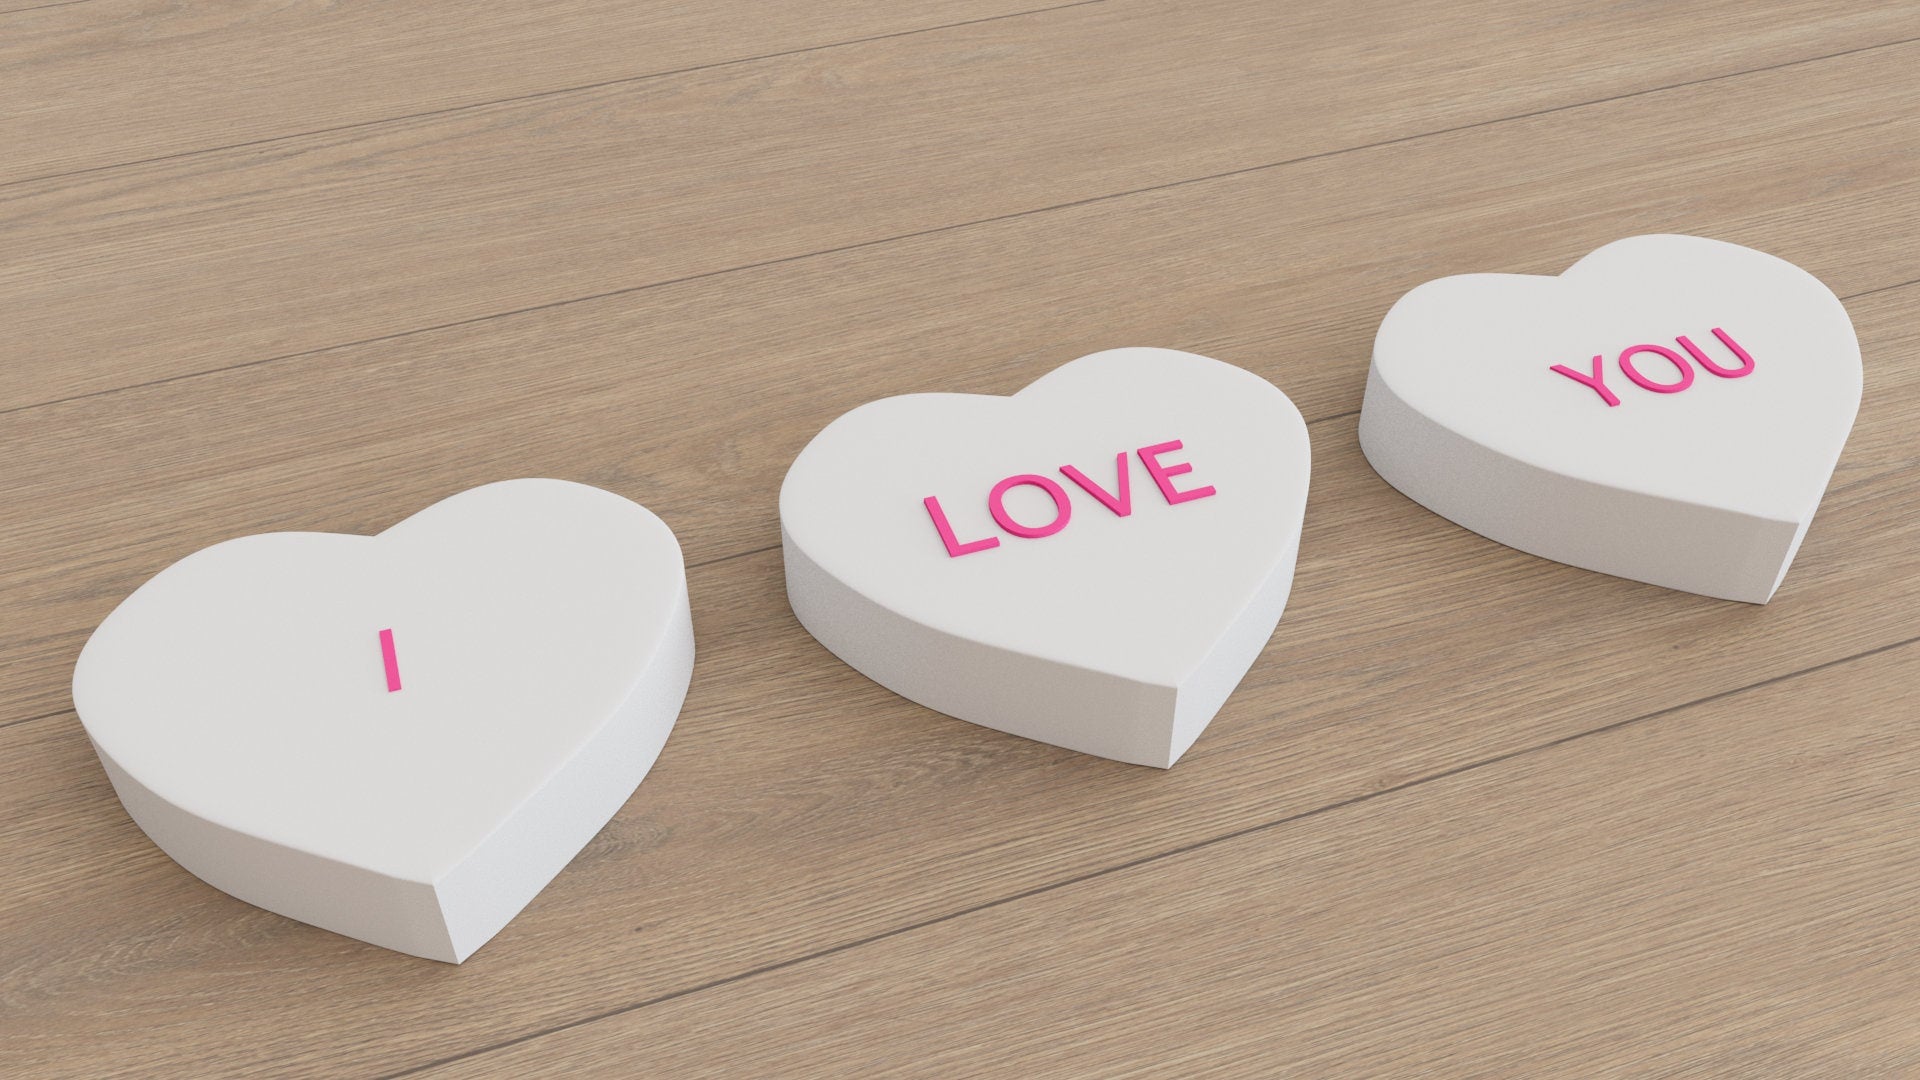 3D Custom Heart Wall Tiles In Tons of Sizes & Colors! 6in Wide, Set of 3. Create A Modern Wall With Easy On Off 3D Custom Heart Wall Tiles